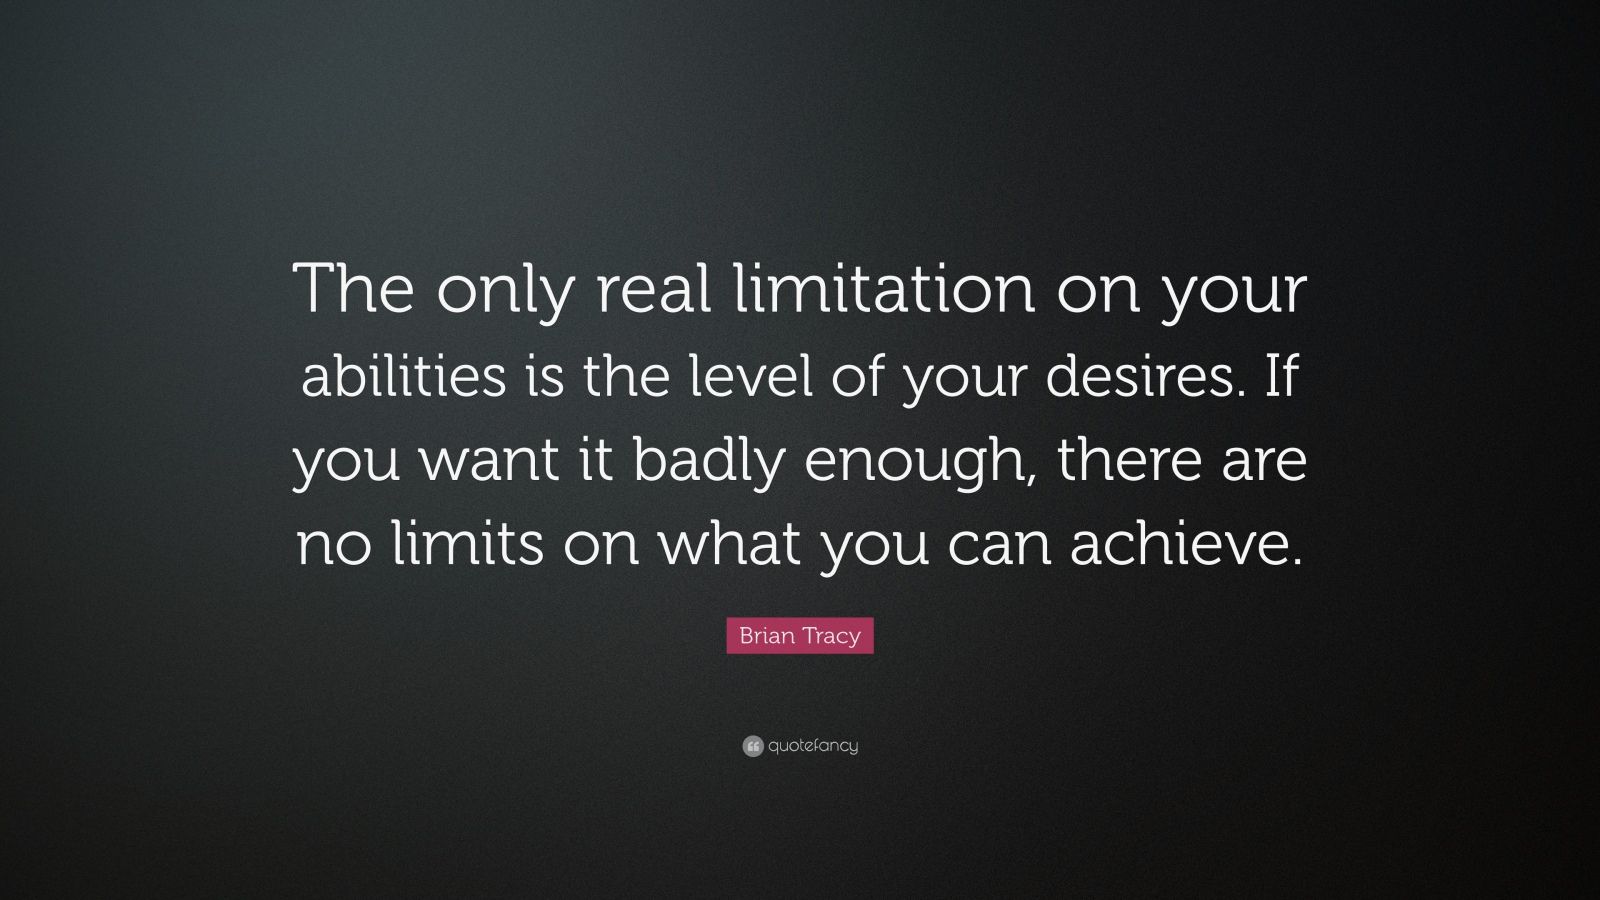 Brian Tracy Quote: “The only real limitation on your abilities is the level of your desires. If you  want it badly enough, there are no limits on what you can achieve.   ”